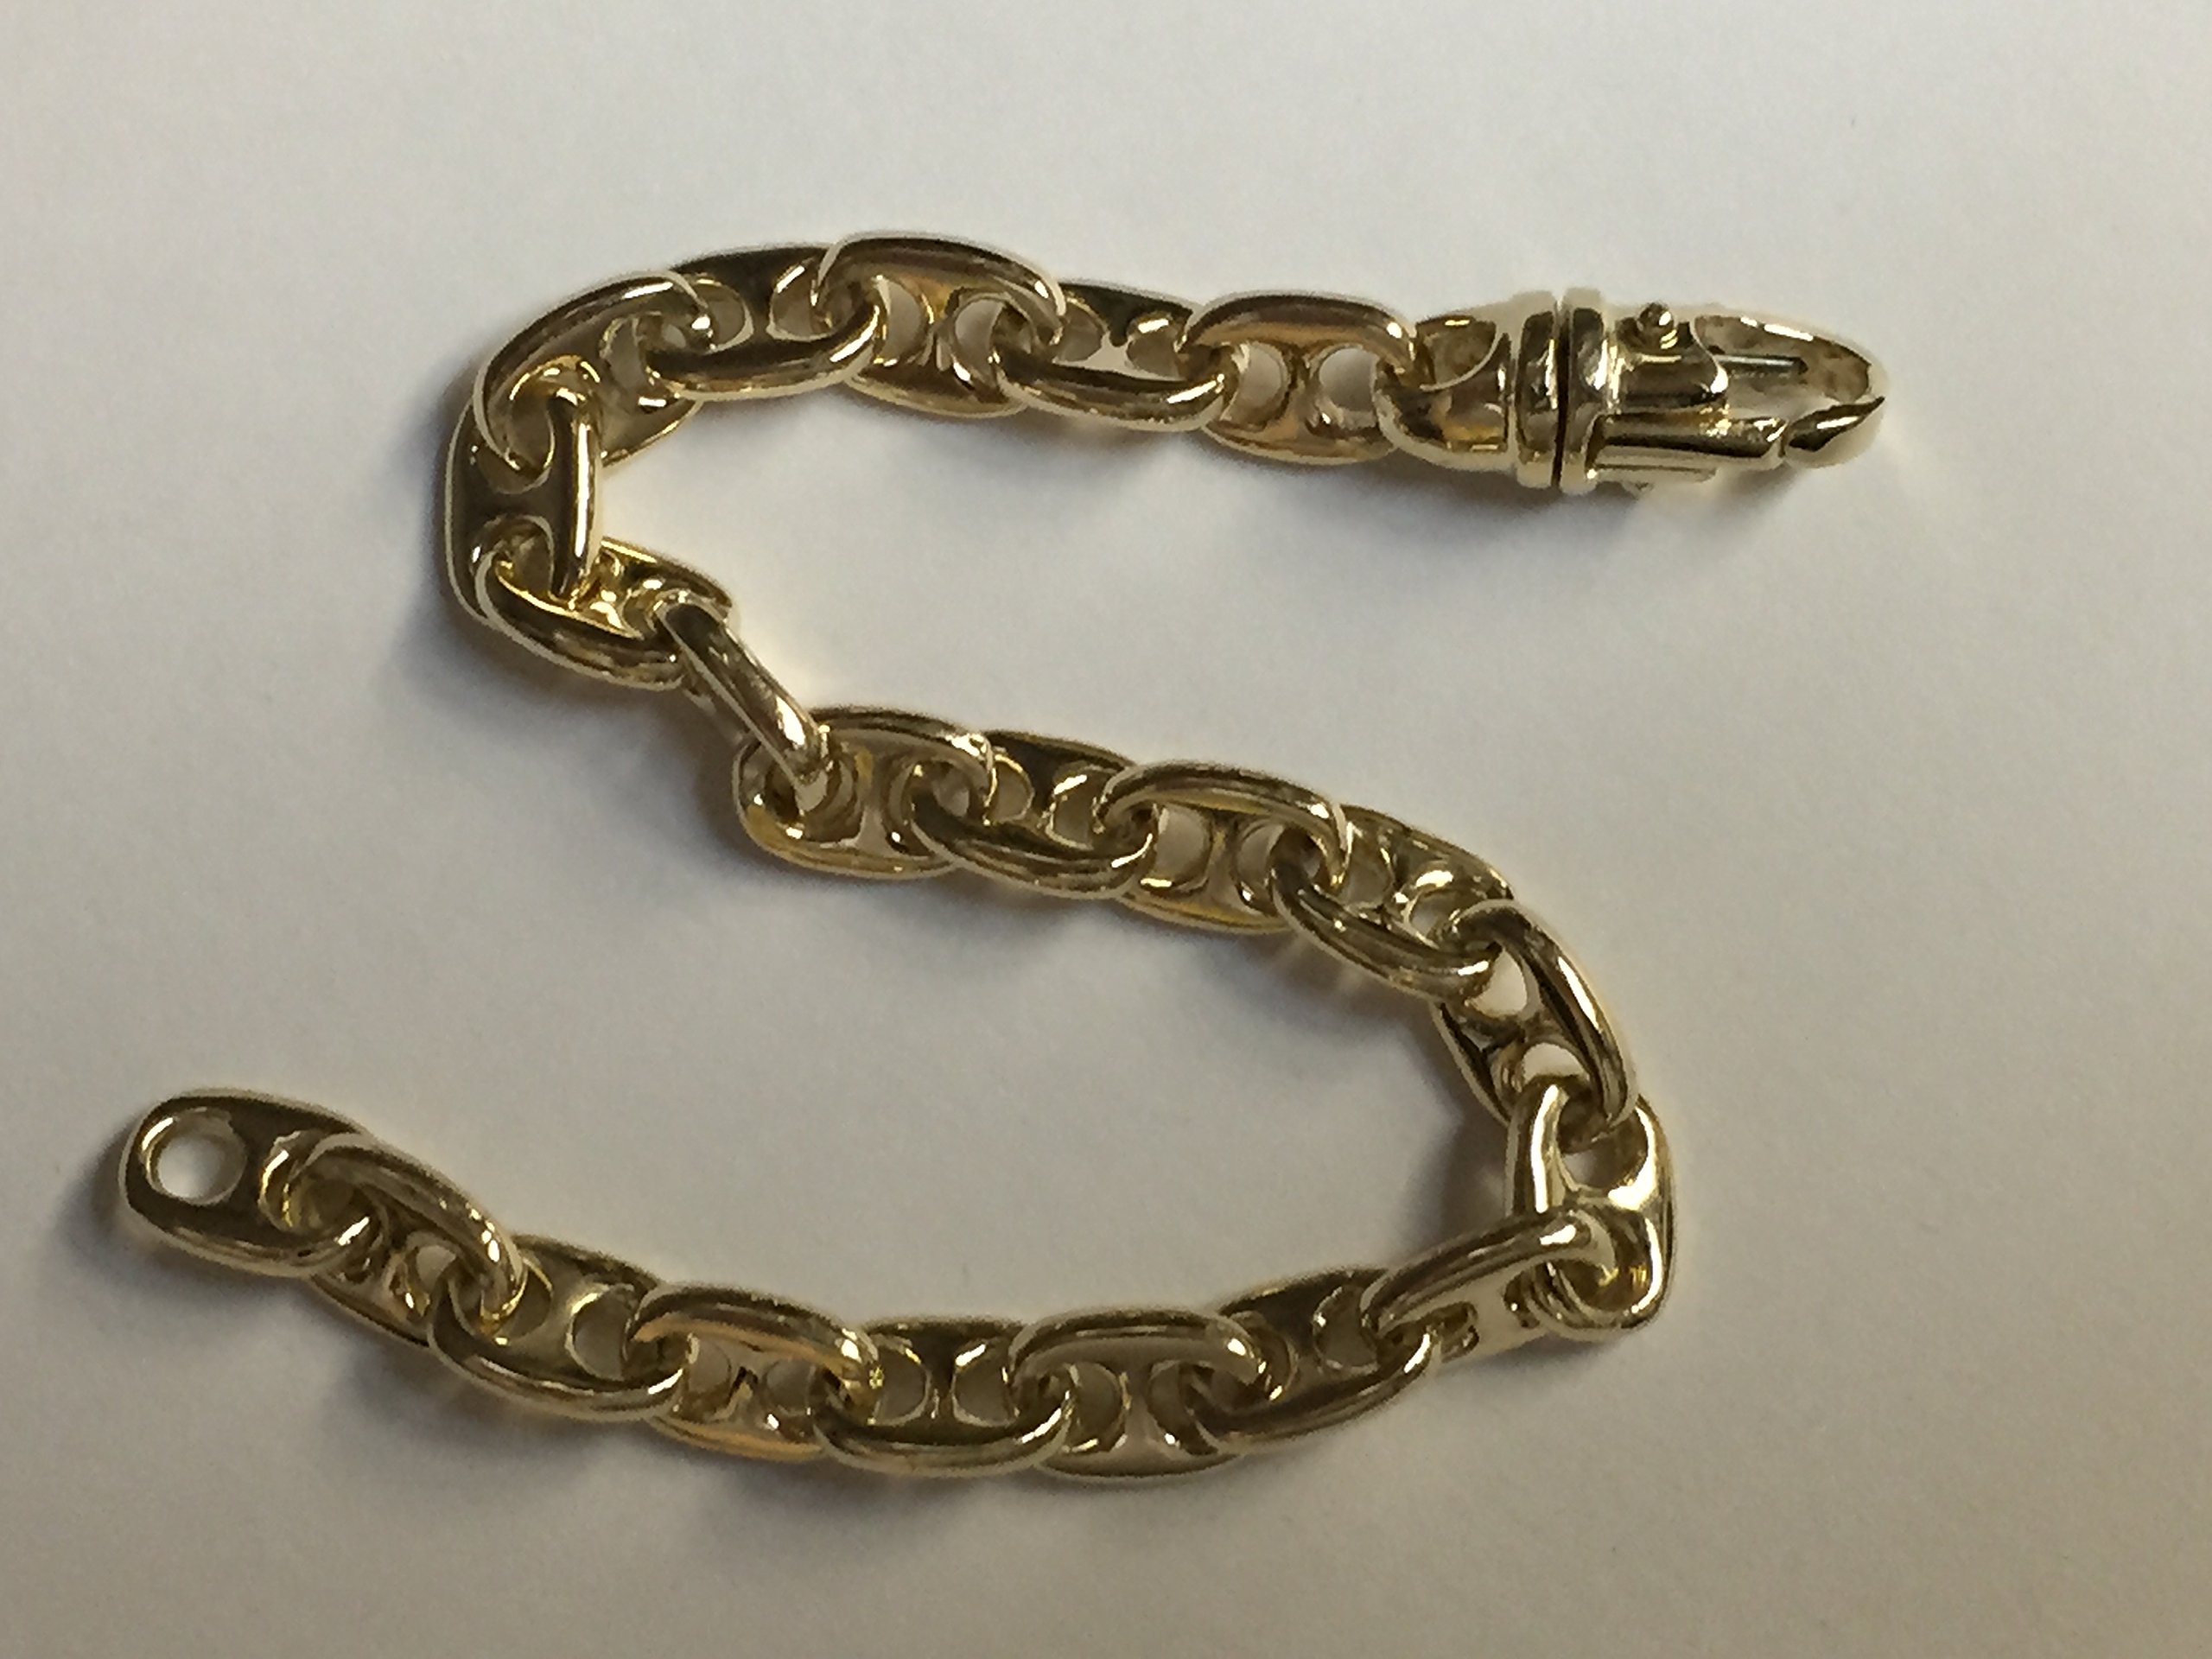 TEX 14K Solid Yellow Gold Heavy Anchor Mariner Chain/Bracelet 8 Mm 32 Grams 8